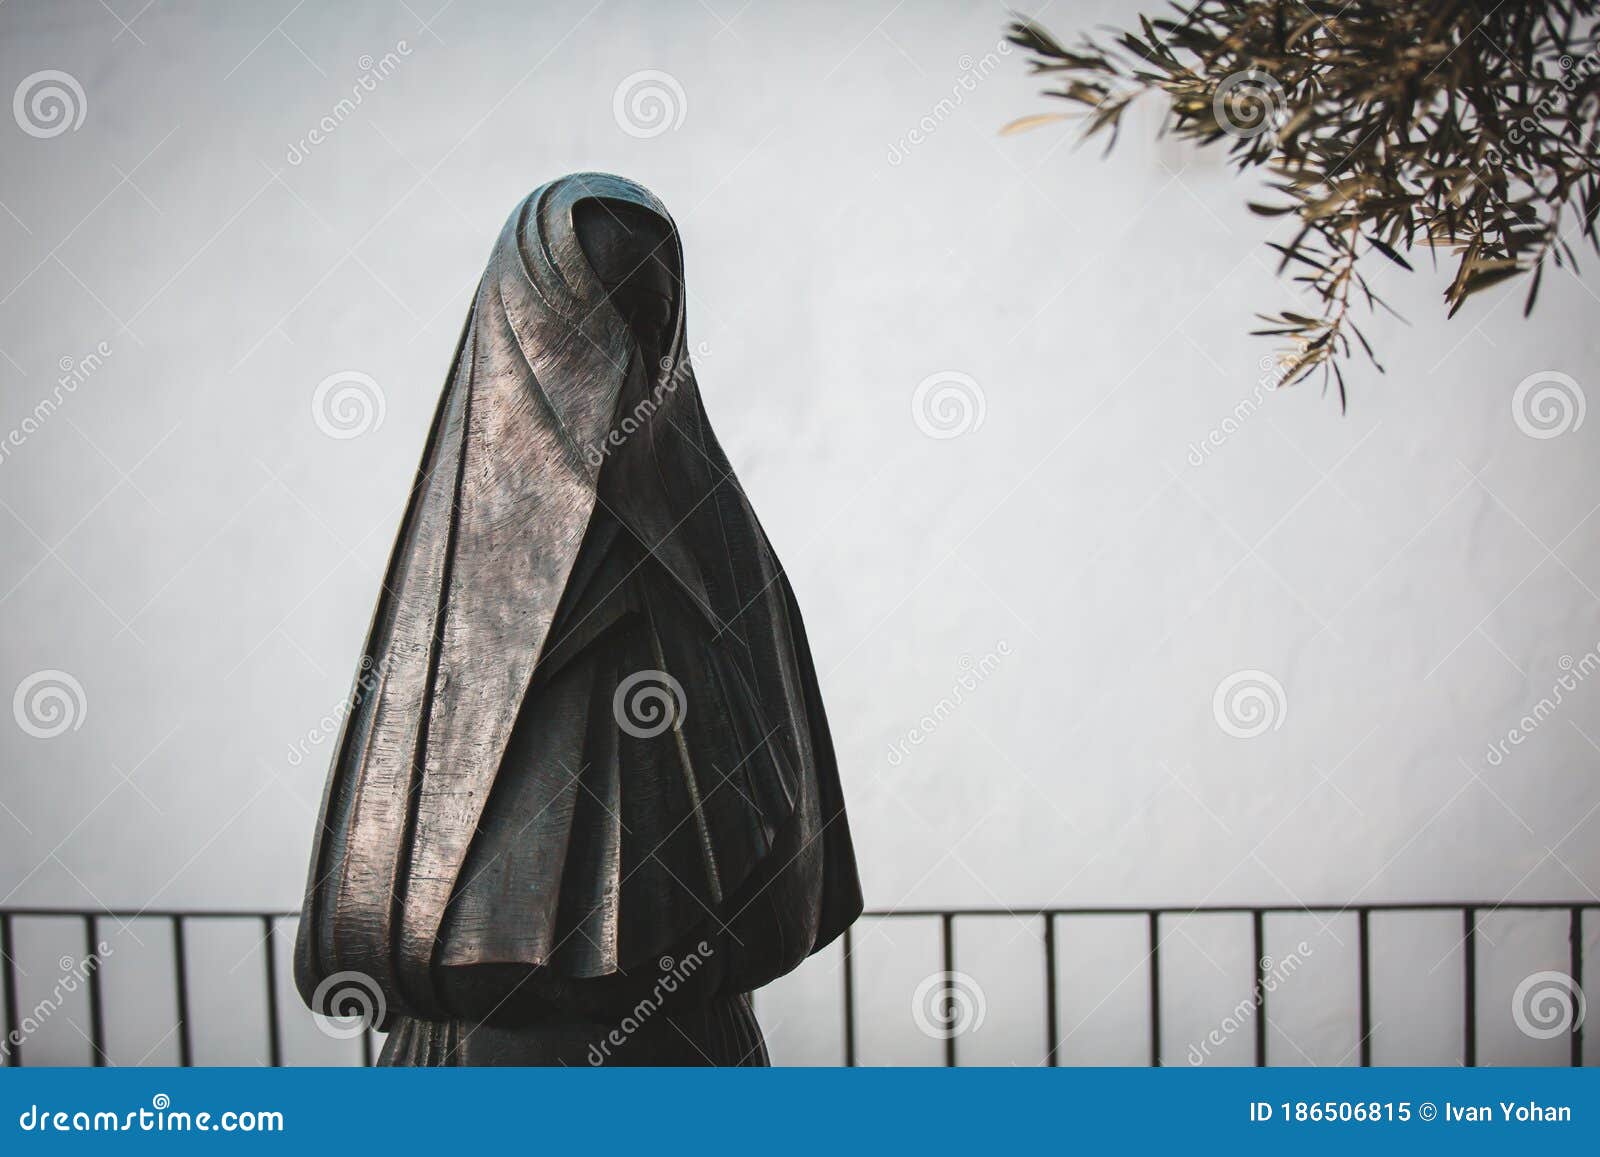 statue of a woman dressed in black cloak and head veil `la cobijada` from her back